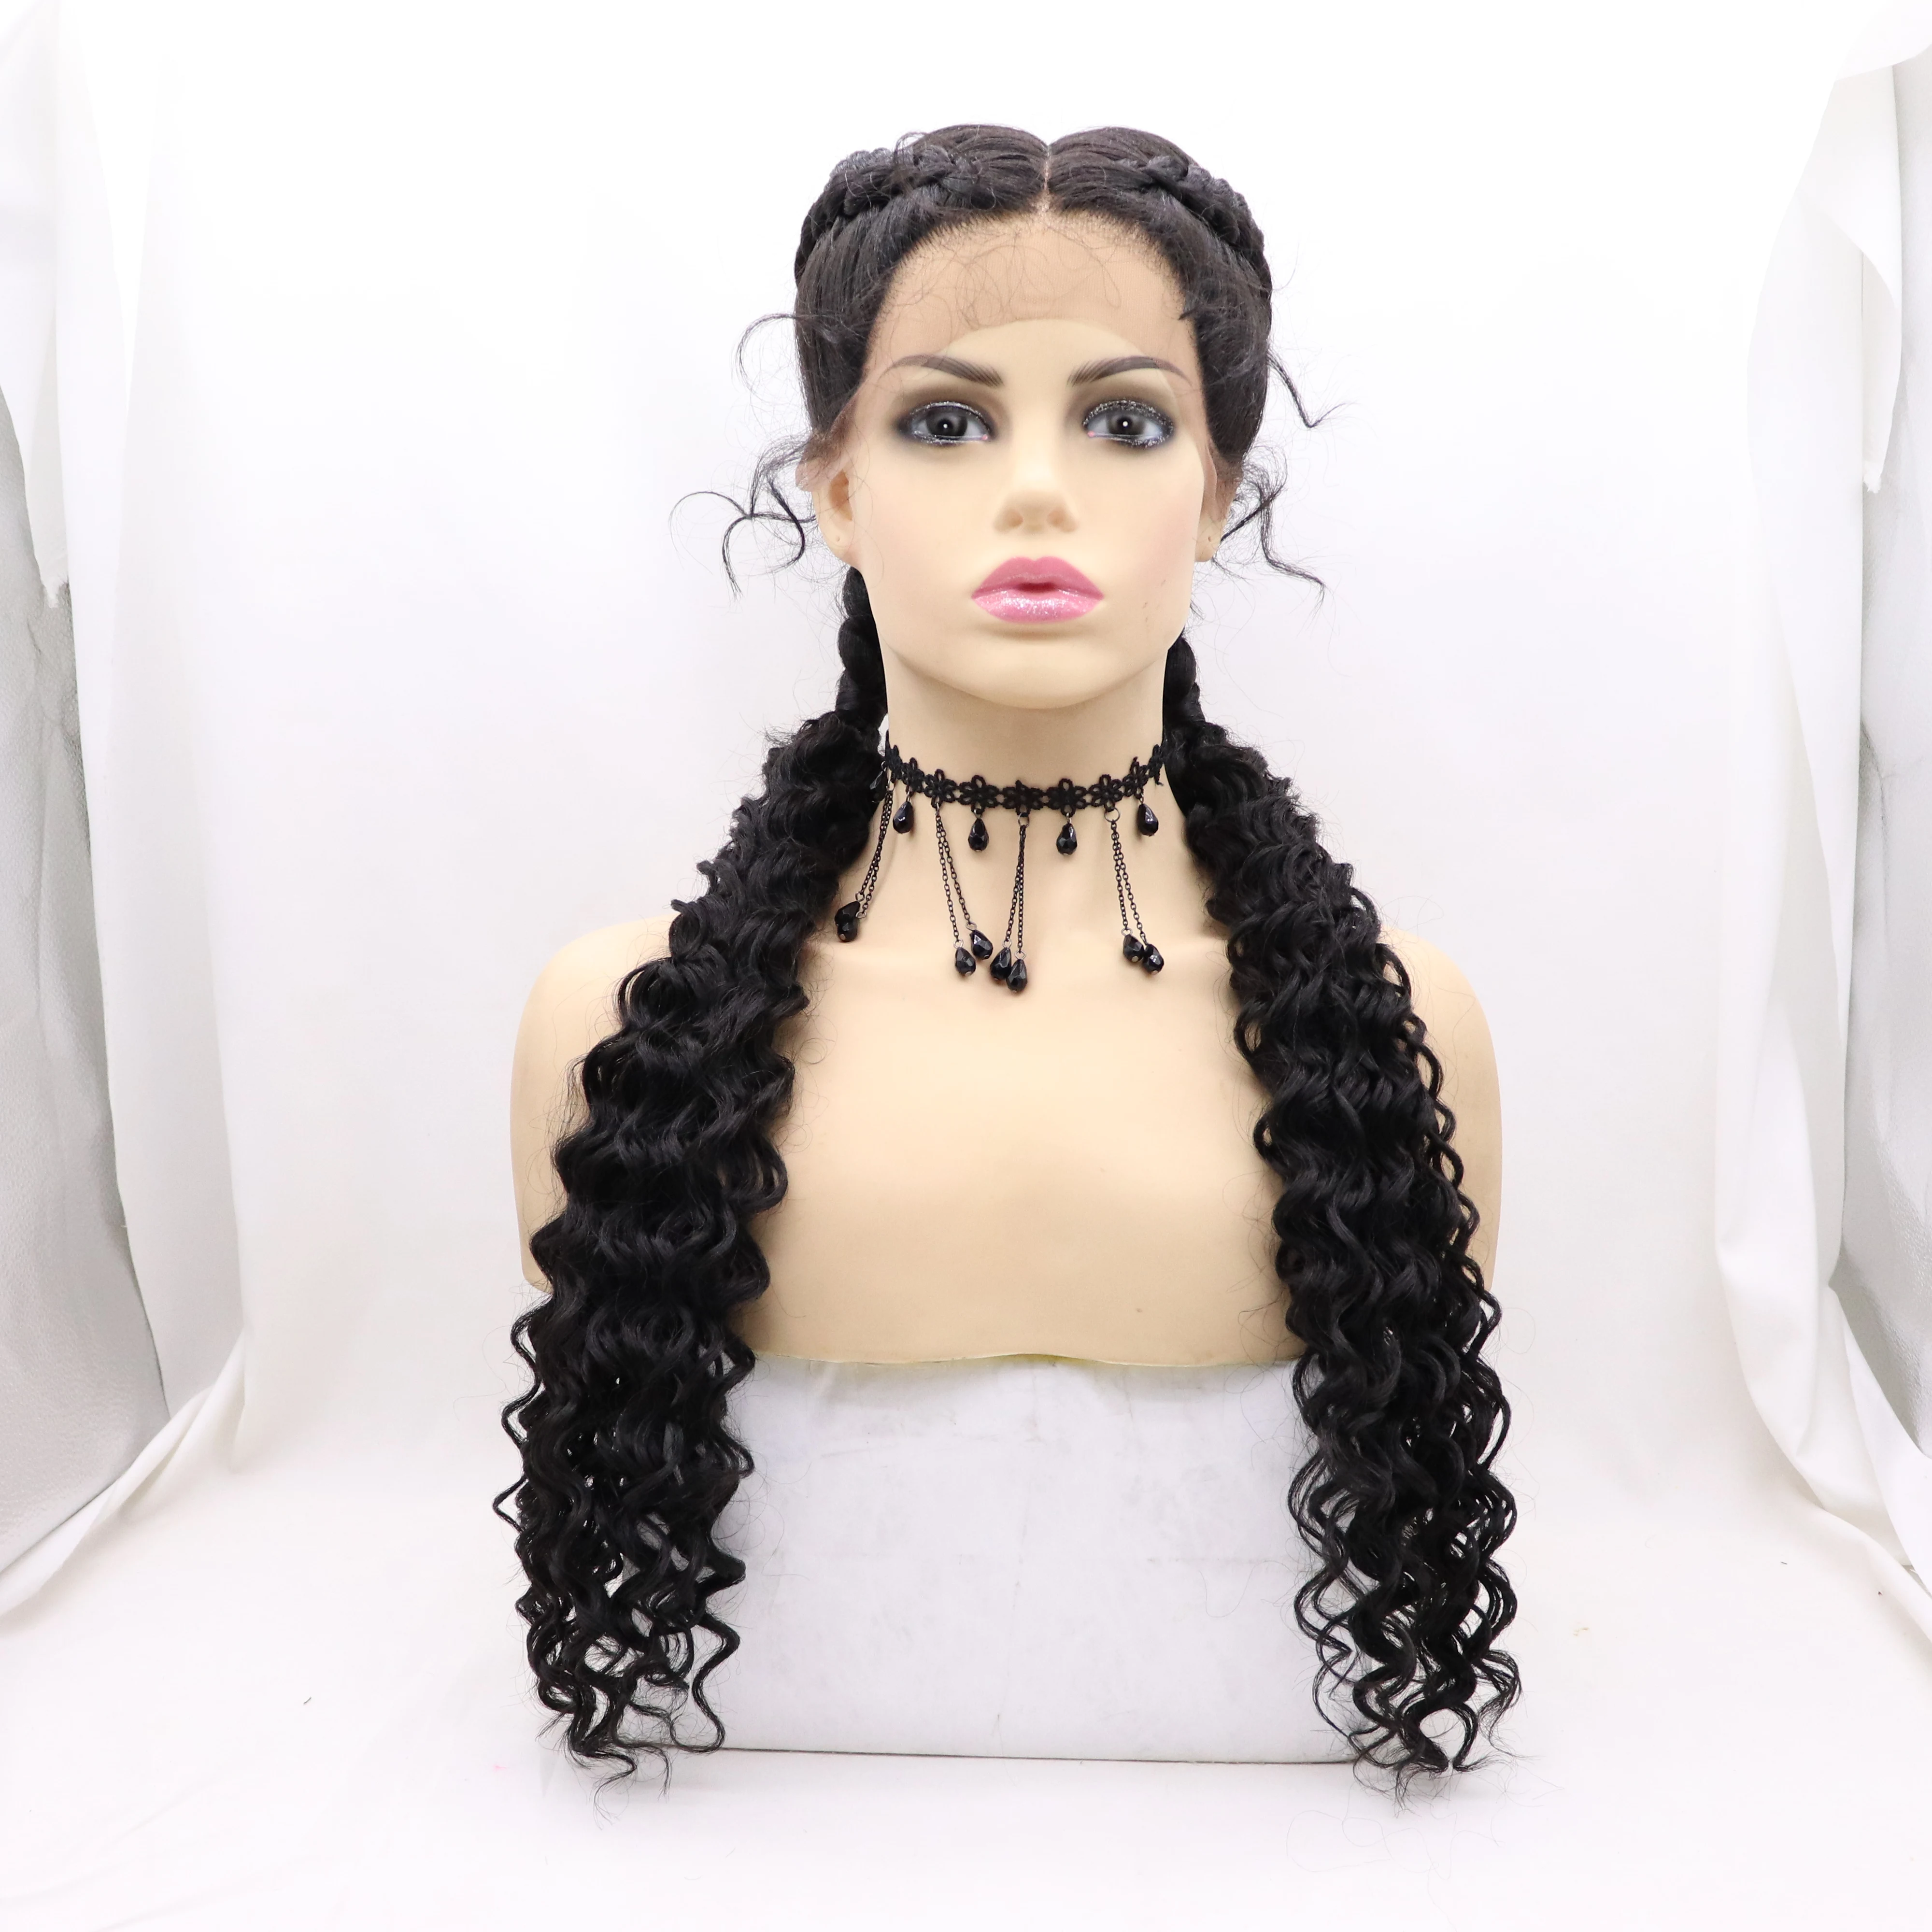 Melody Synthetic Lace Front Wig Handmade 2X Double Twist Braided Curly 1B#Natural Black for Women Natural Looking Drag Queen